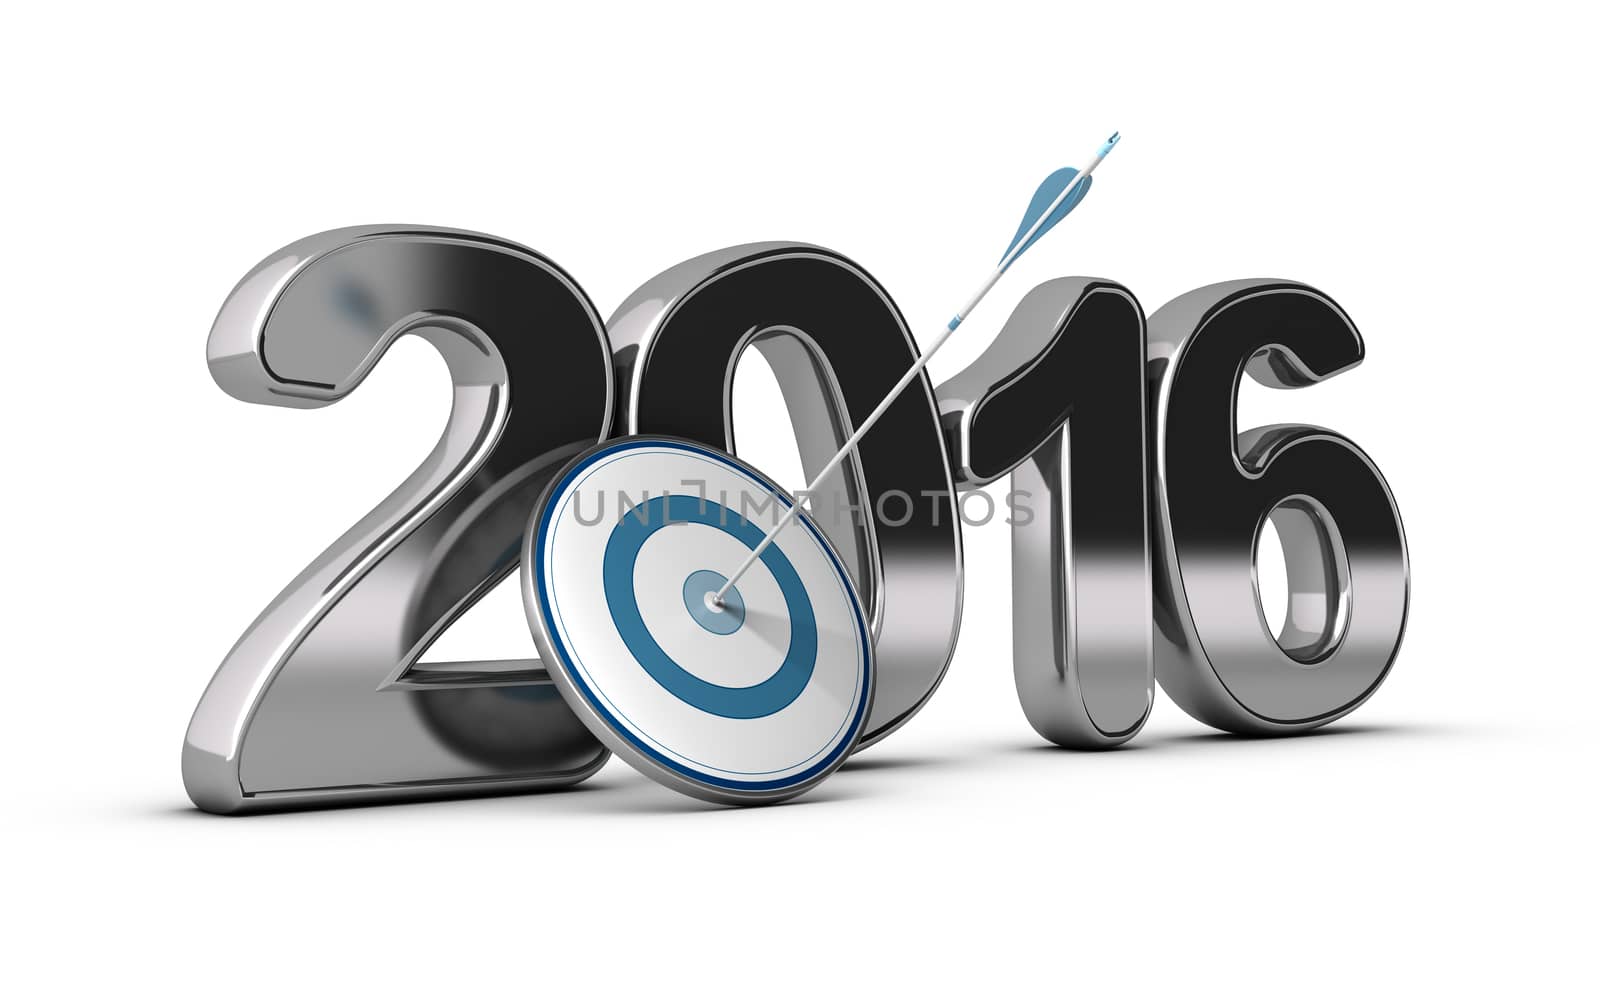 3D metallic Year 2016 with a target at the foreground with an arrow hitting the center, concept image for achieving business objectives in two thousand sixteen. 